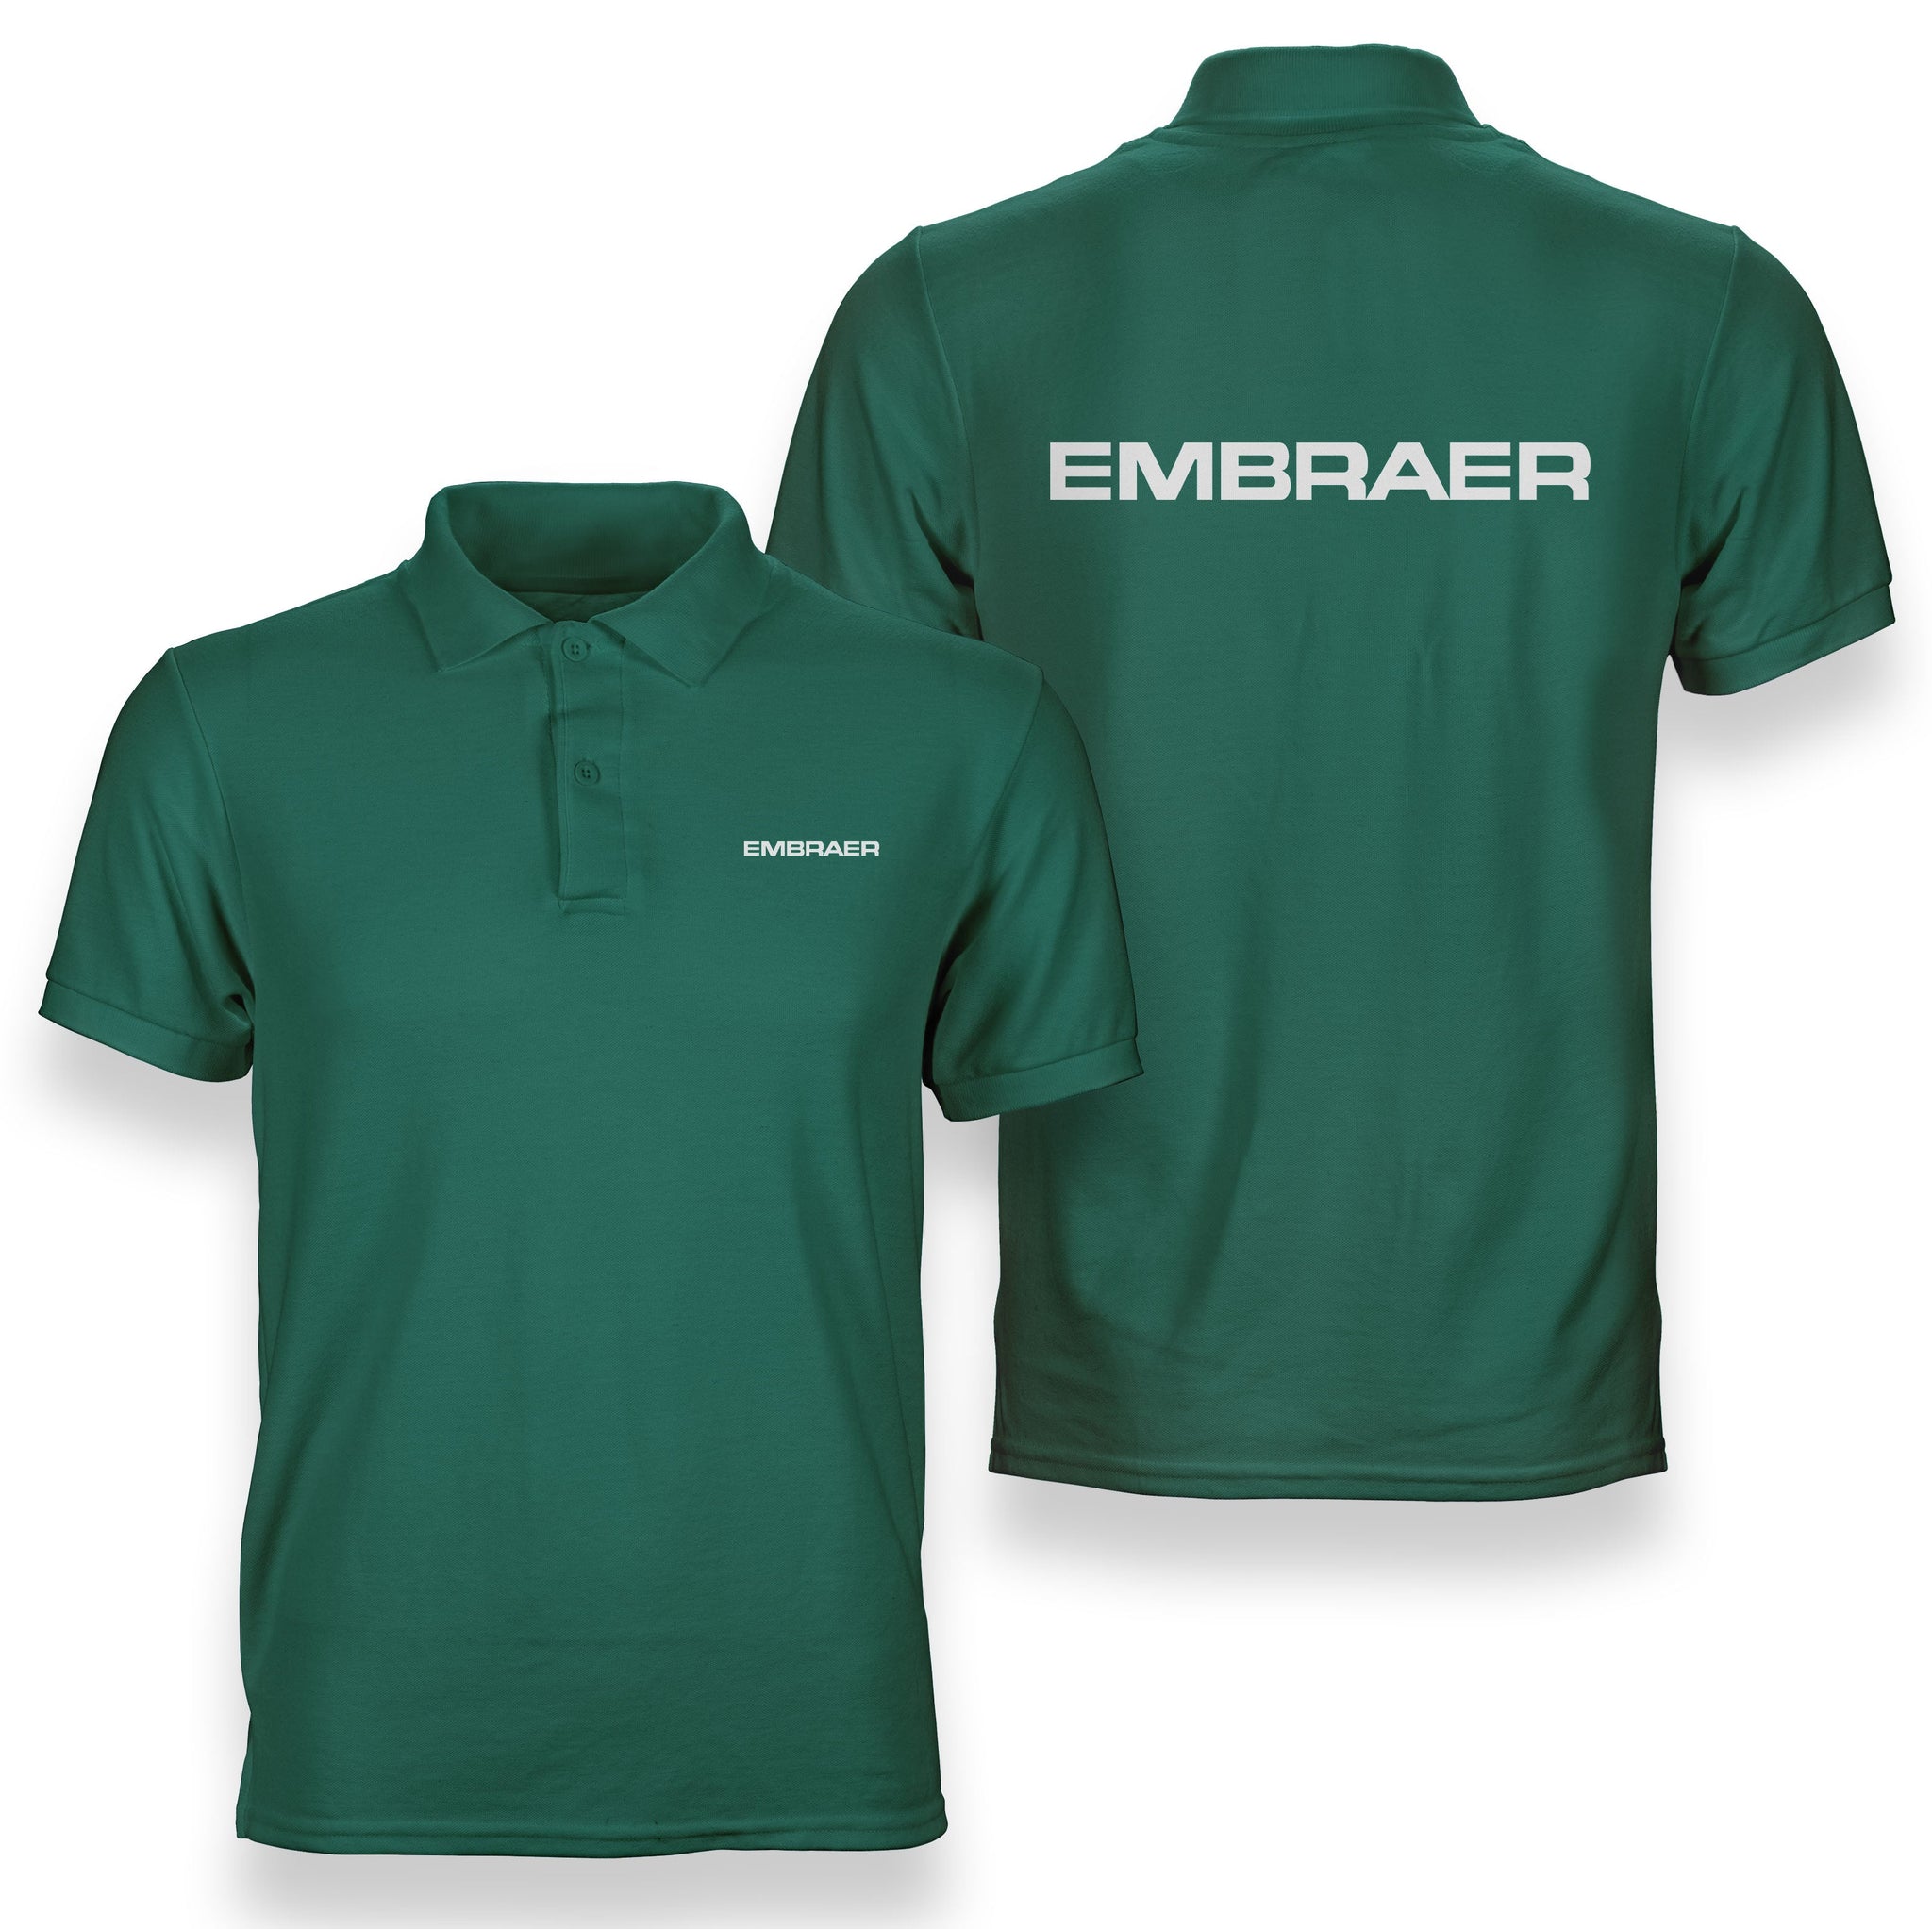 Embraer & Text Designed Double Side Polo T-Shirts